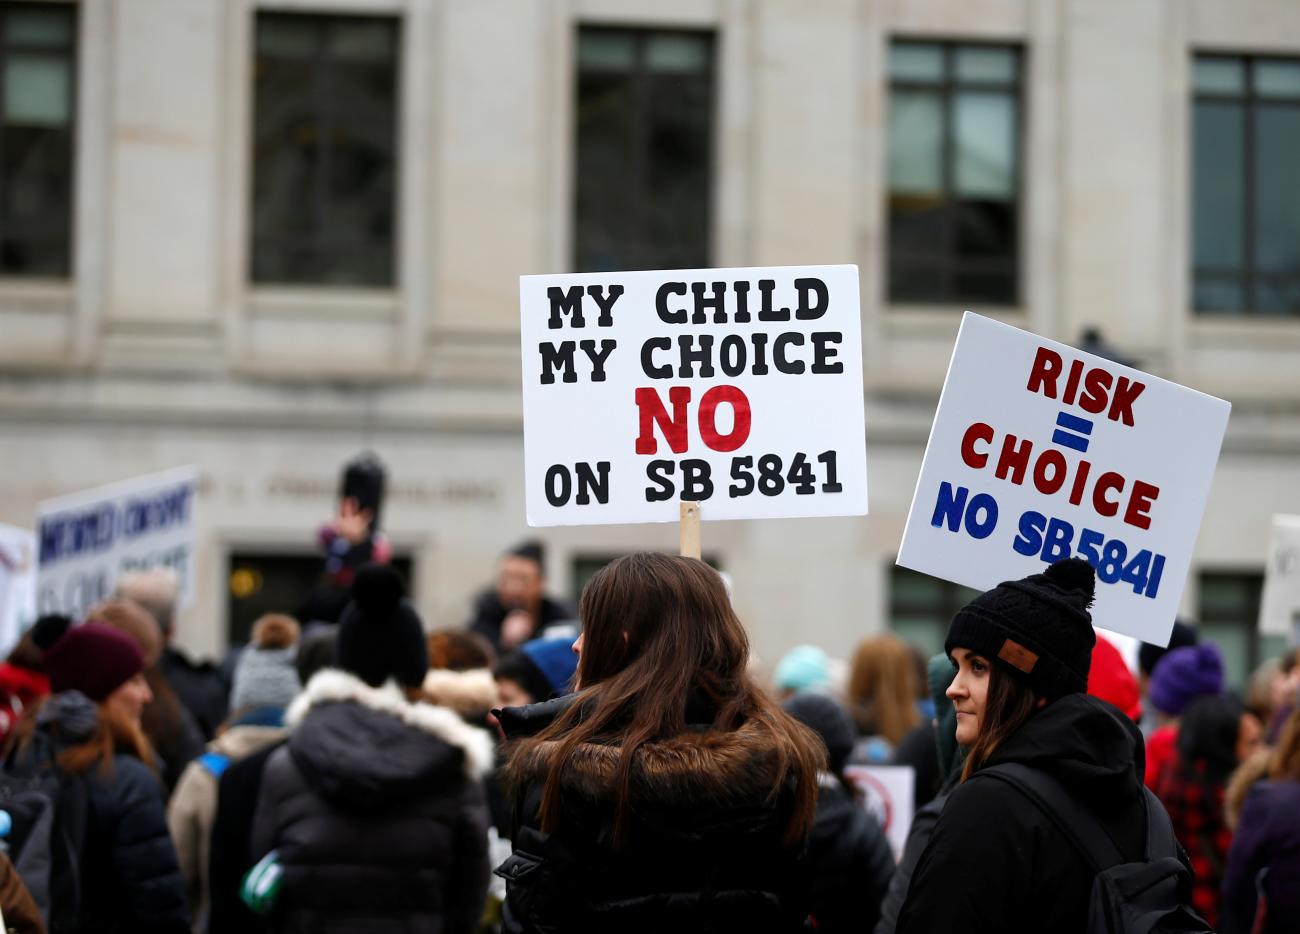 People protest mandatory vaccinations, waving "My Child, My Choice" signs during a "March for Medical Freedom" in Olympia, Washington, on February 20, 2019.